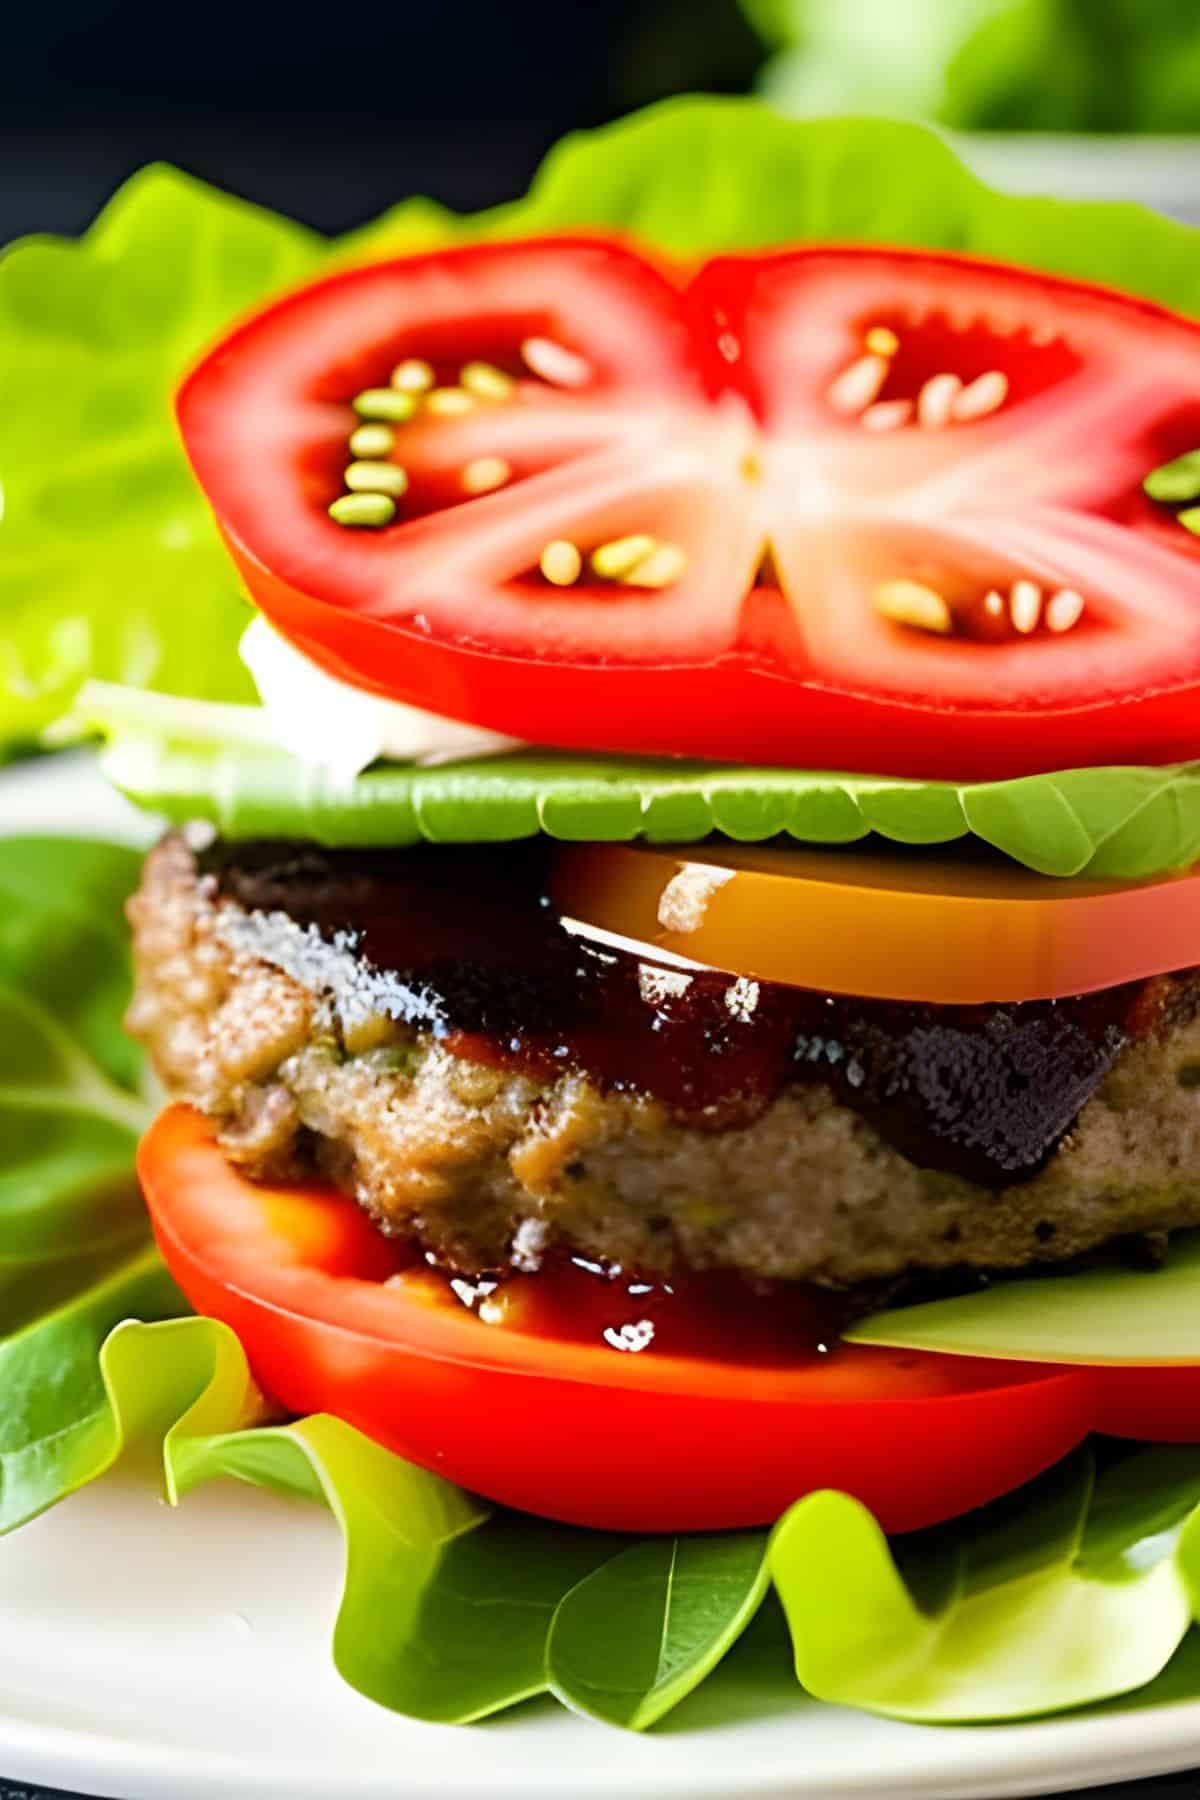 a burger with no bun wrapped in lettuce leaves with a tomatoes on the bottom and the top.